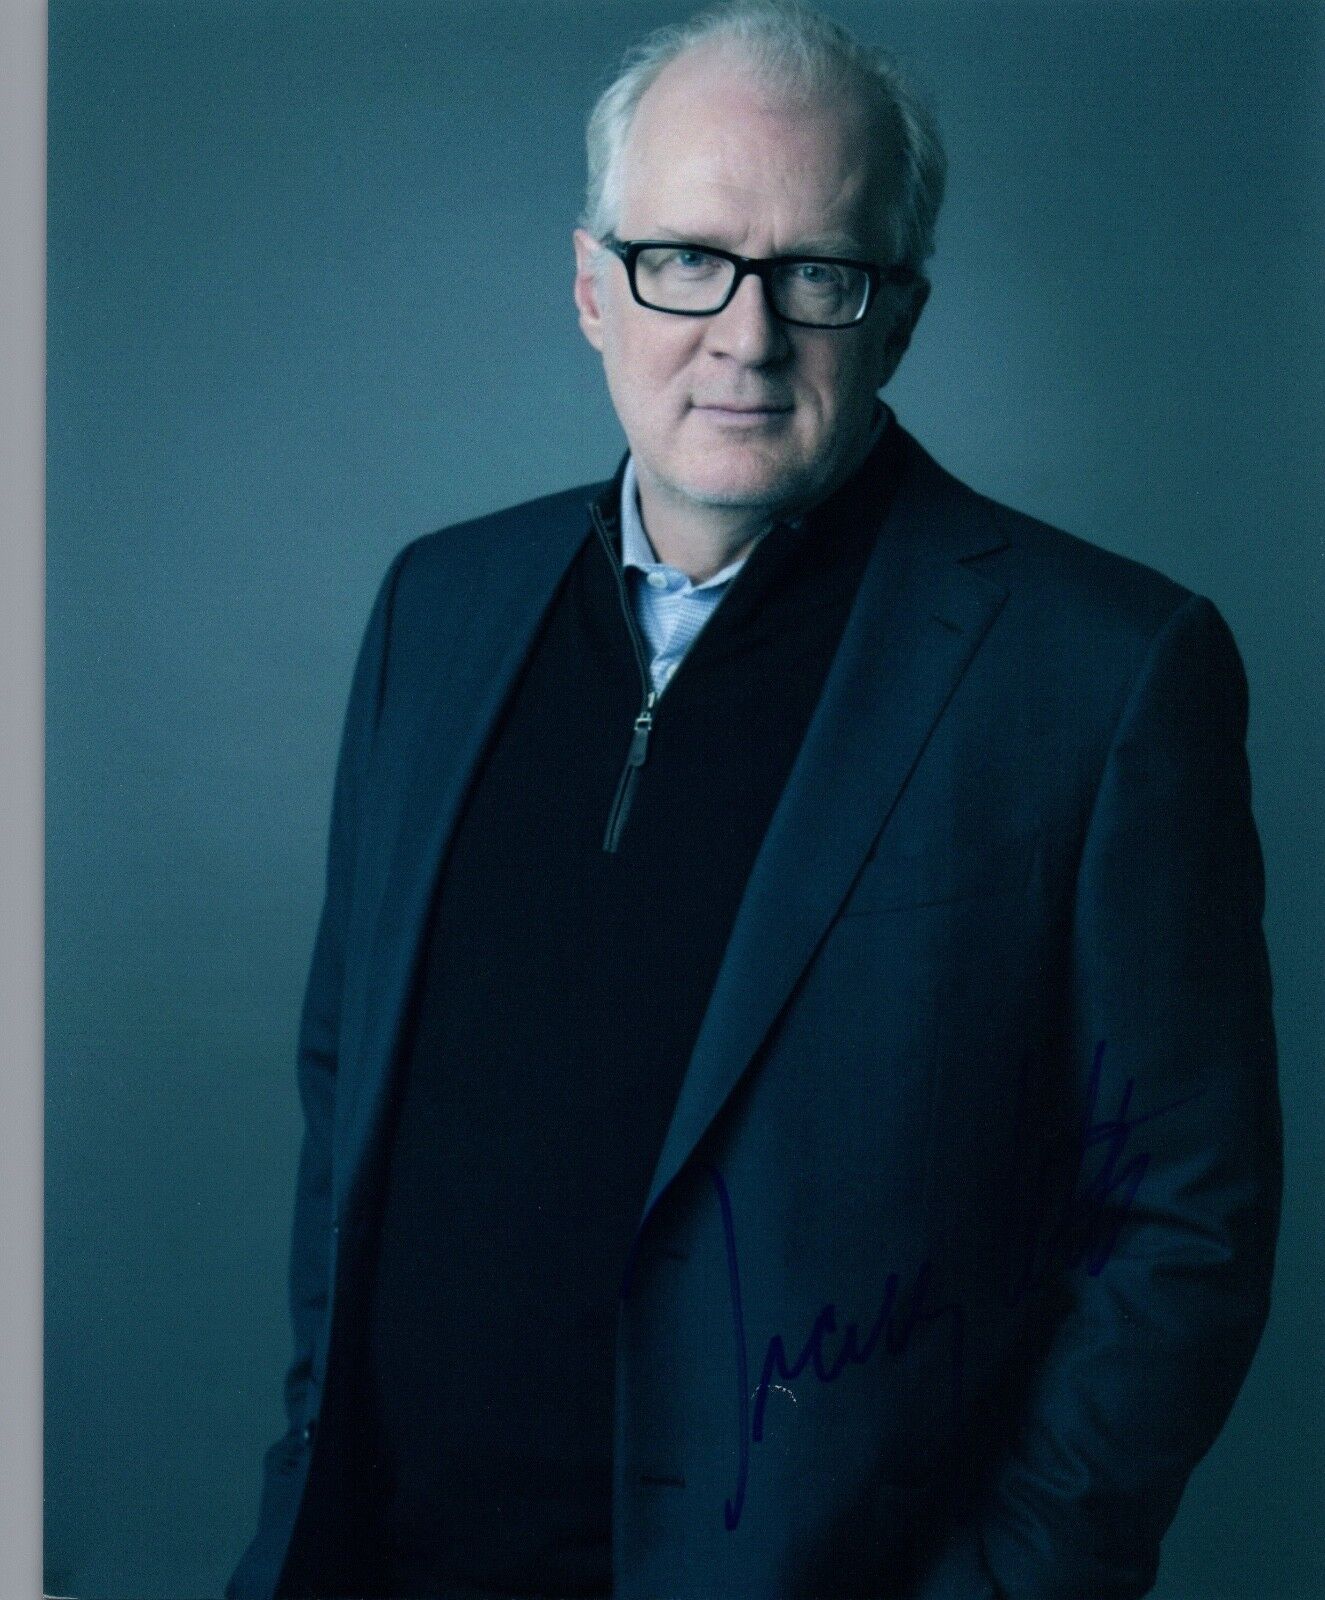 Tracy Letts Signed Autographed 8x10 Photo Poster painting THE LOVERS & LADYBIRD Actor COA AB